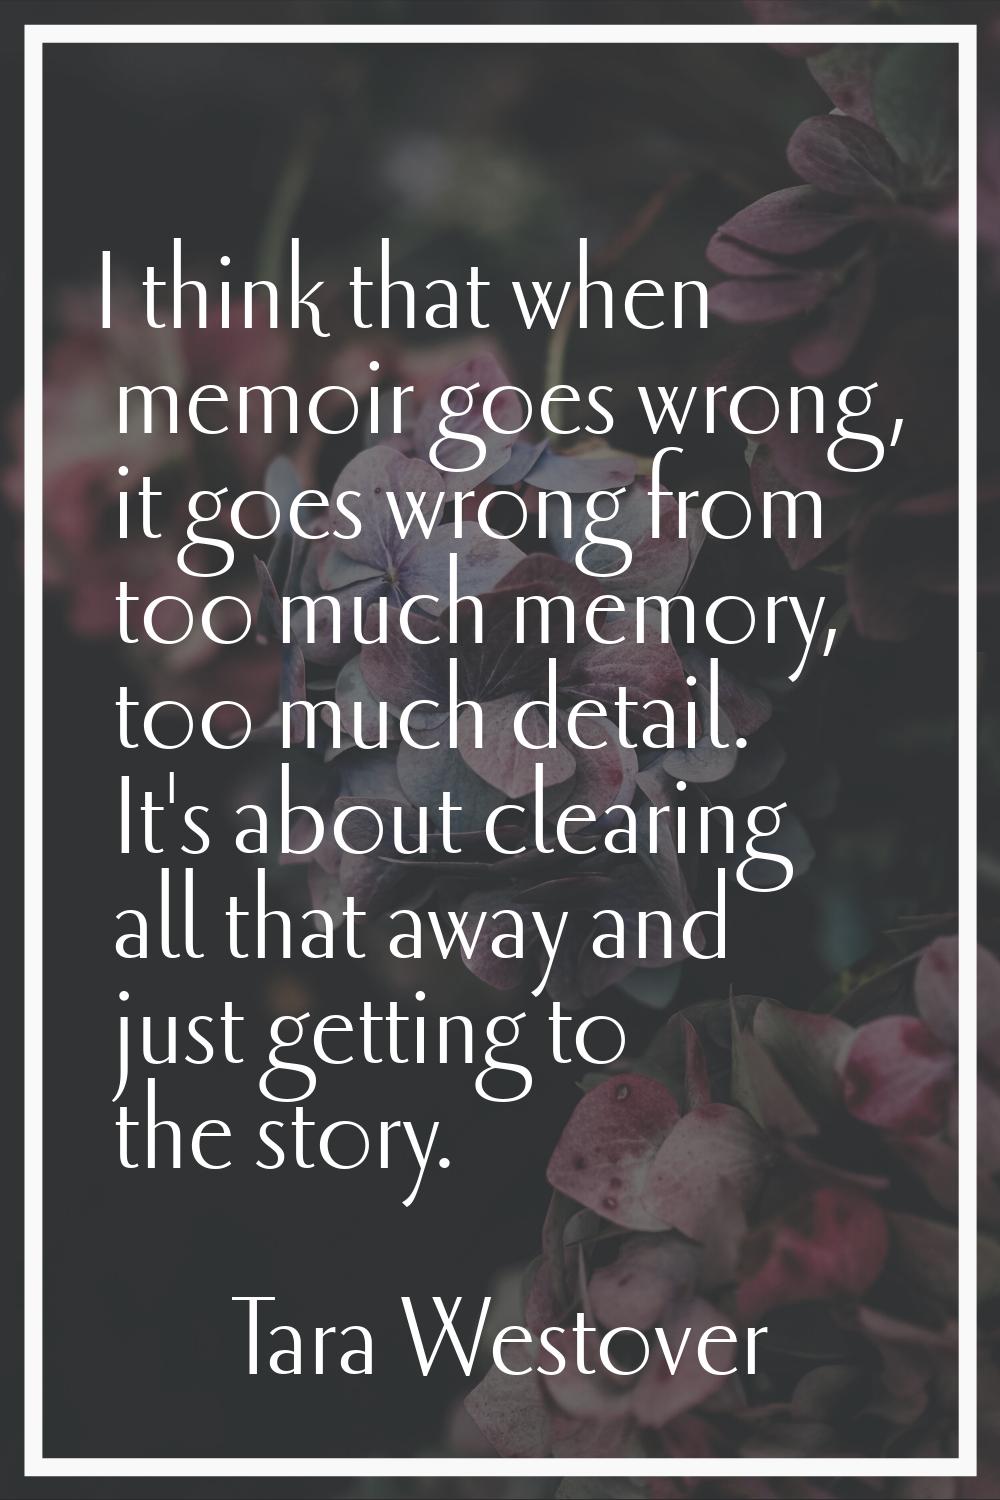 I think that when memoir goes wrong, it goes wrong from too much memory, too much detail. It's abou